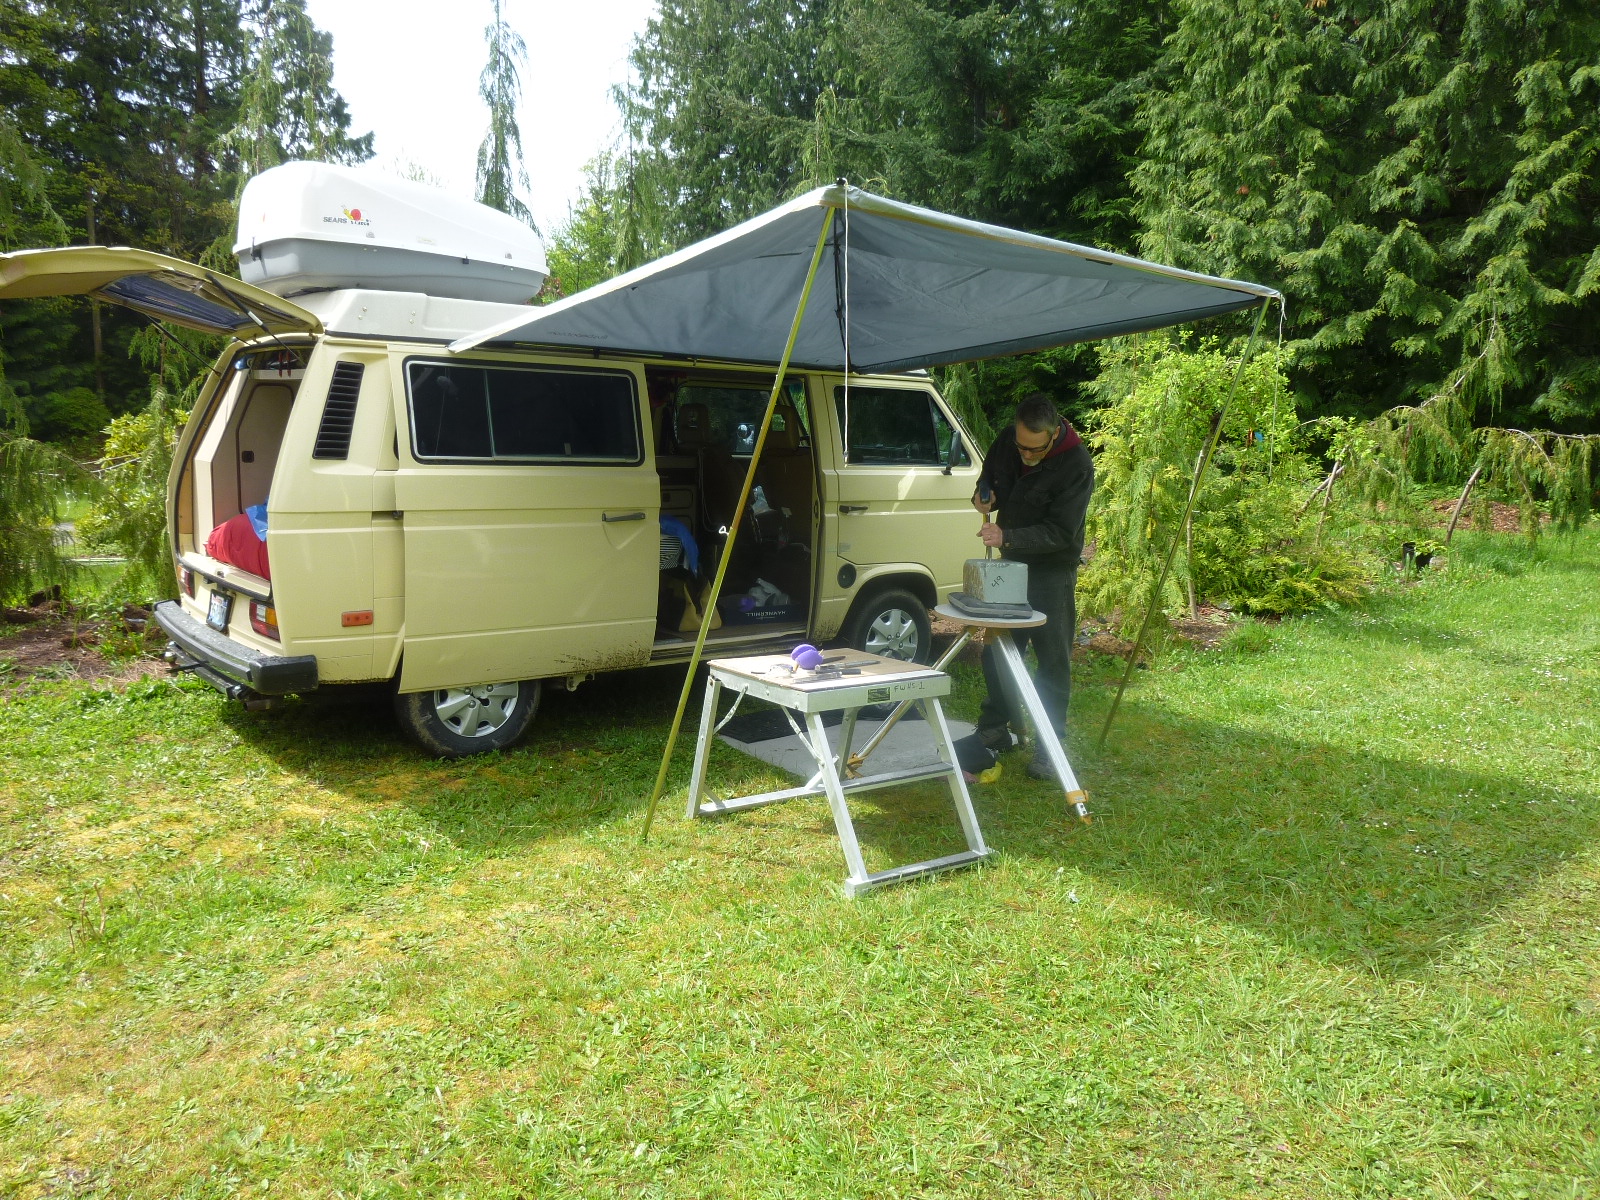 Paul Sizer spent a year touring the US in this Vanagon before bringing it to the workshop as his pop-up tent. 